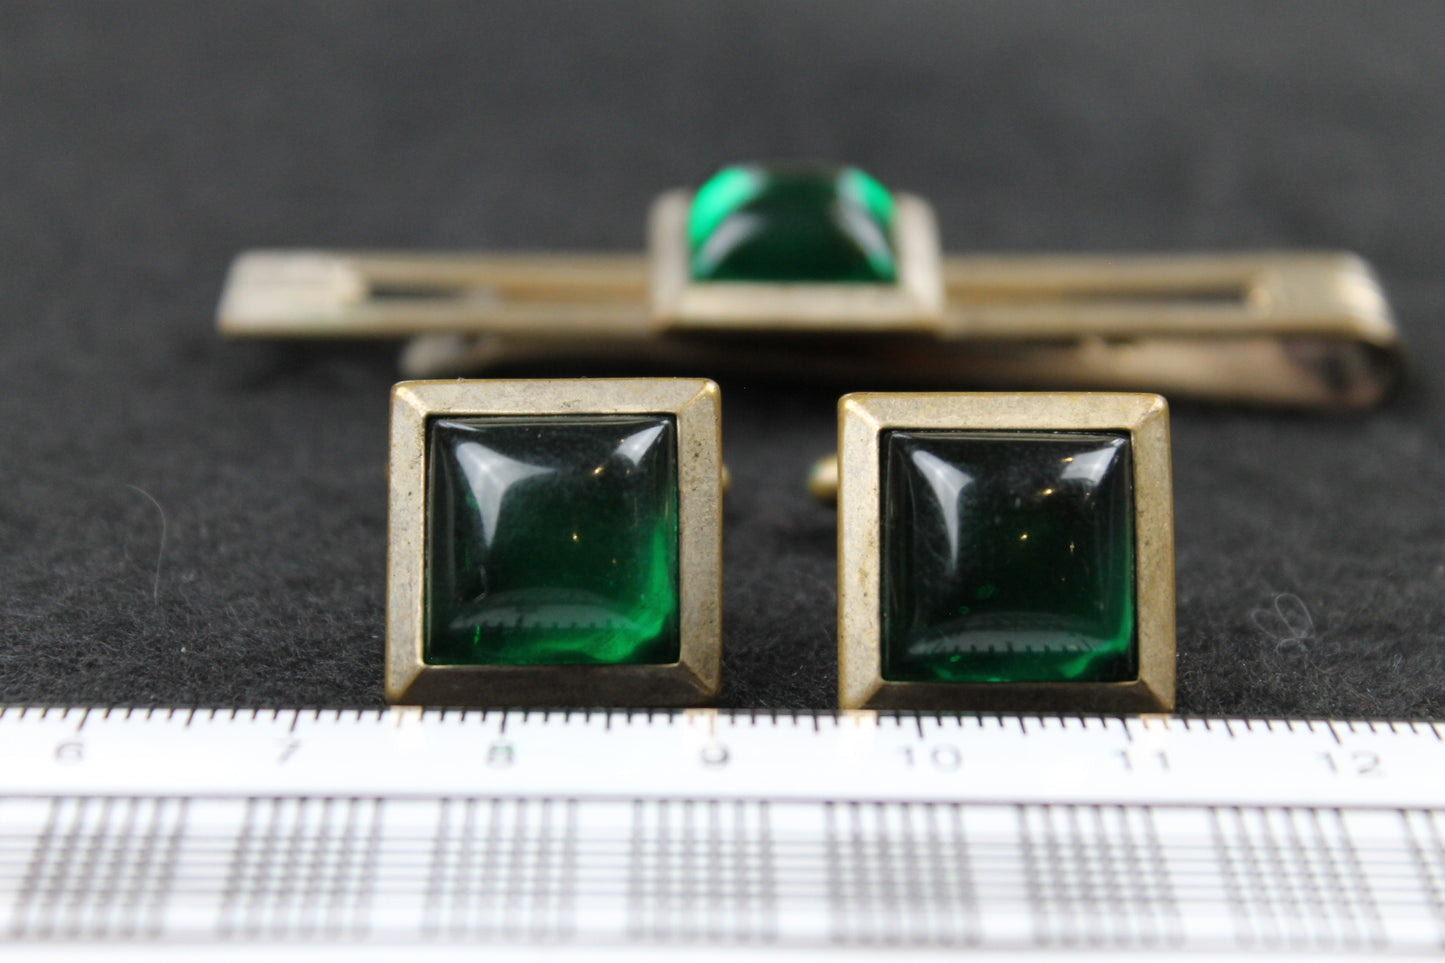 Vintage Green Square Lucite Stone Cufflinks and Tie Clip Set